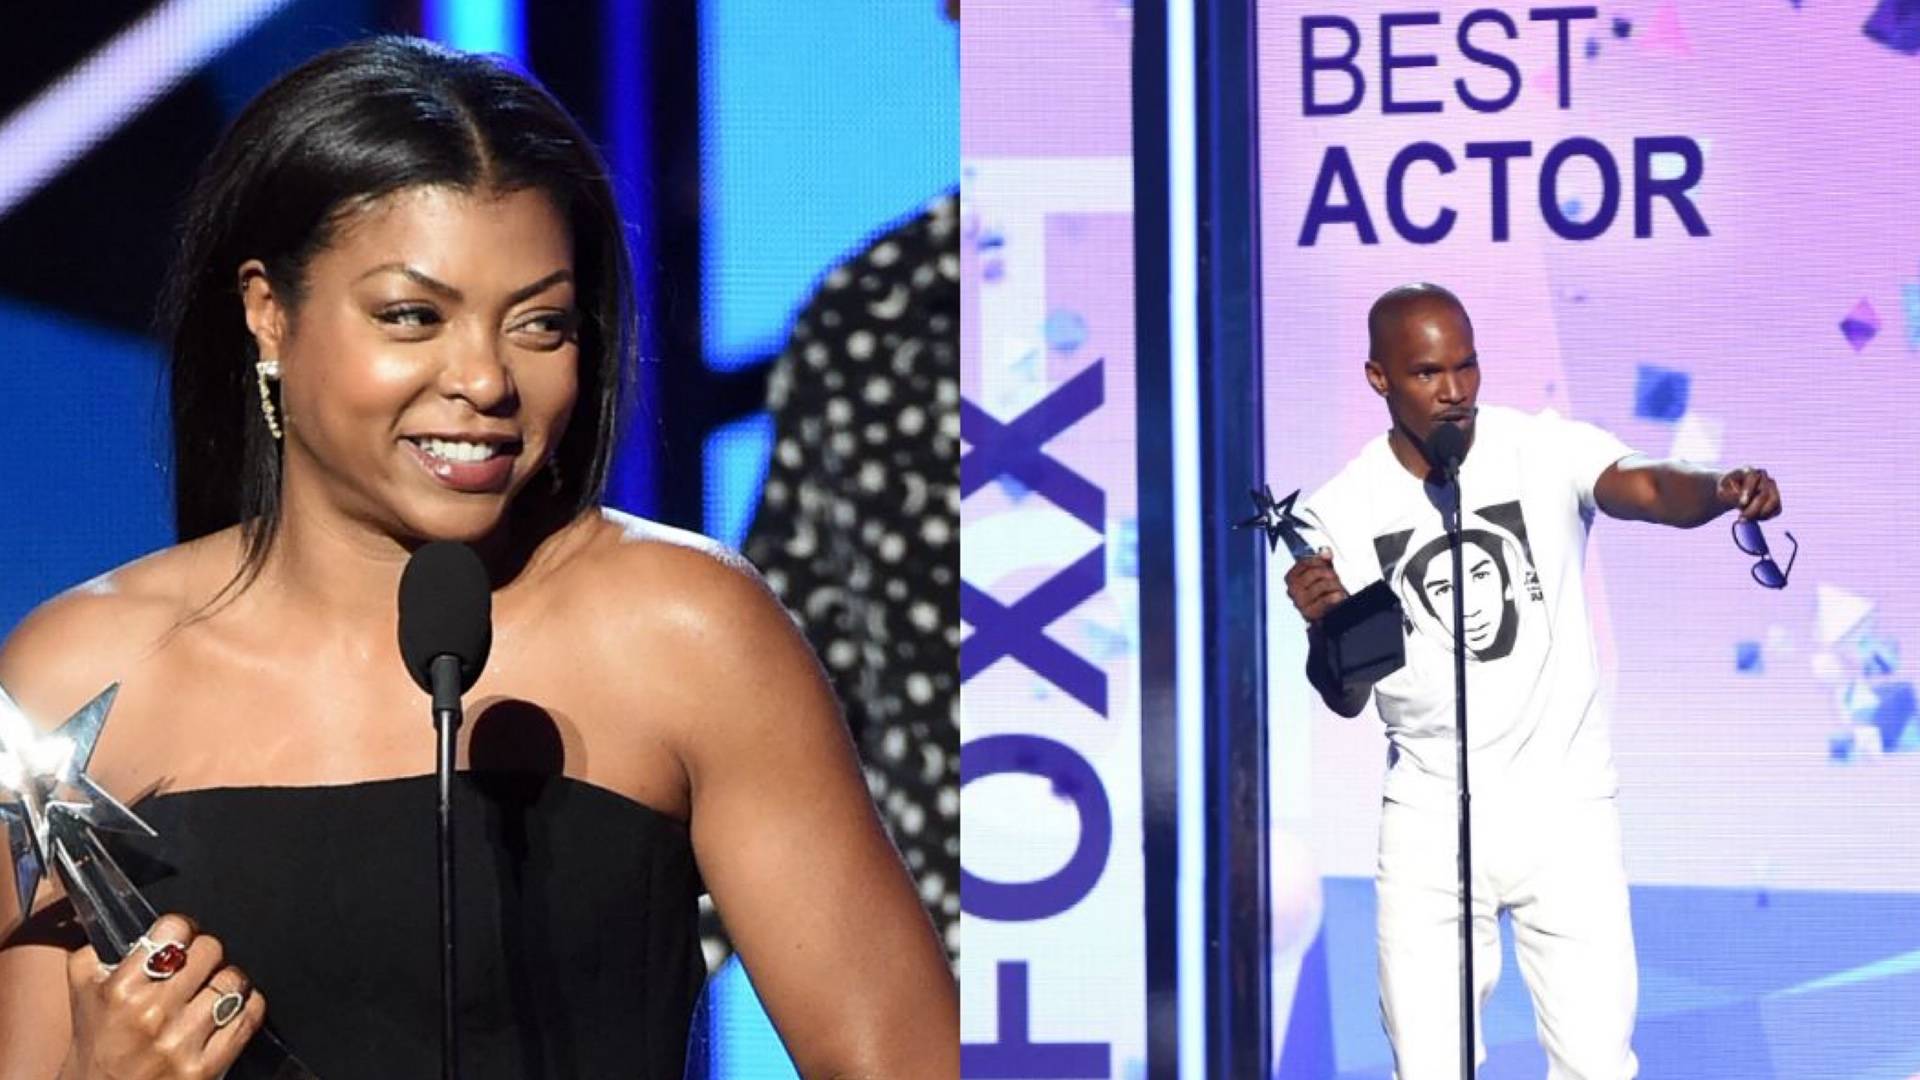 BET Awards '20 Best Male and Female Actor Winners at the BET Awards